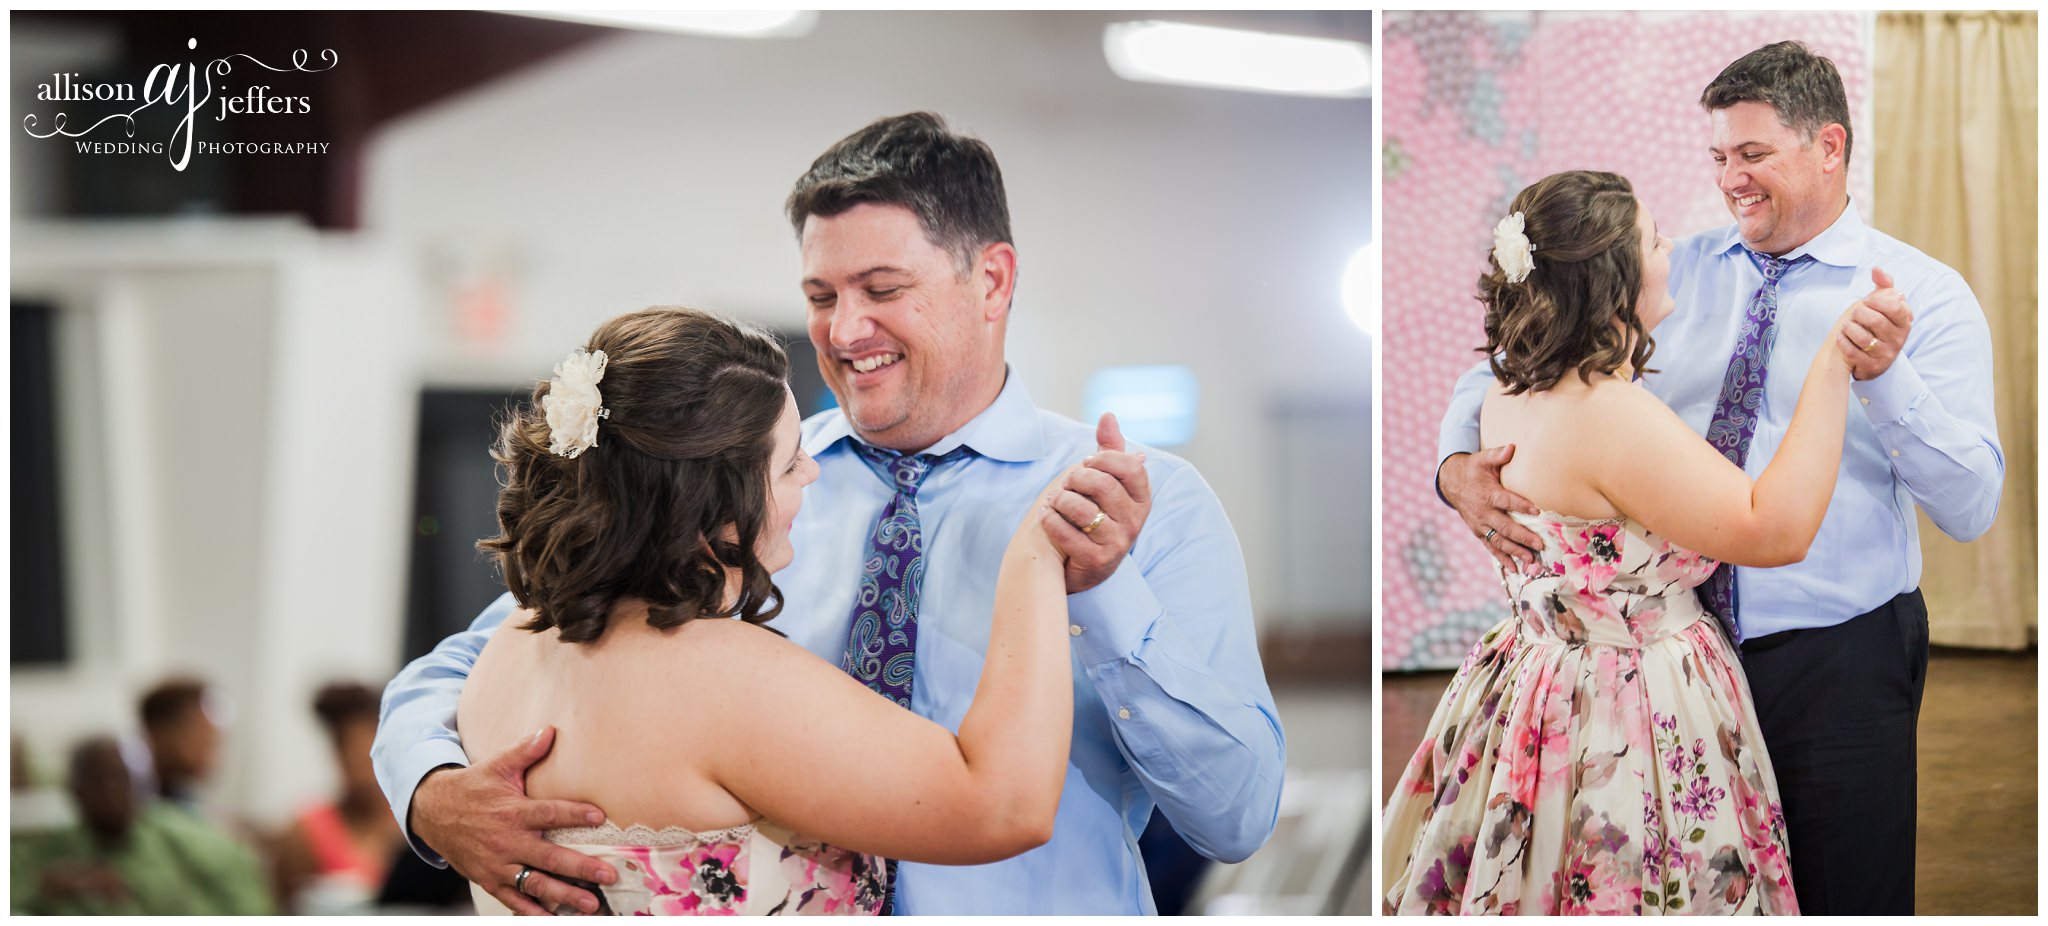 Kerrville Wedding Photographer Unique fun wedding with floral dress 0074